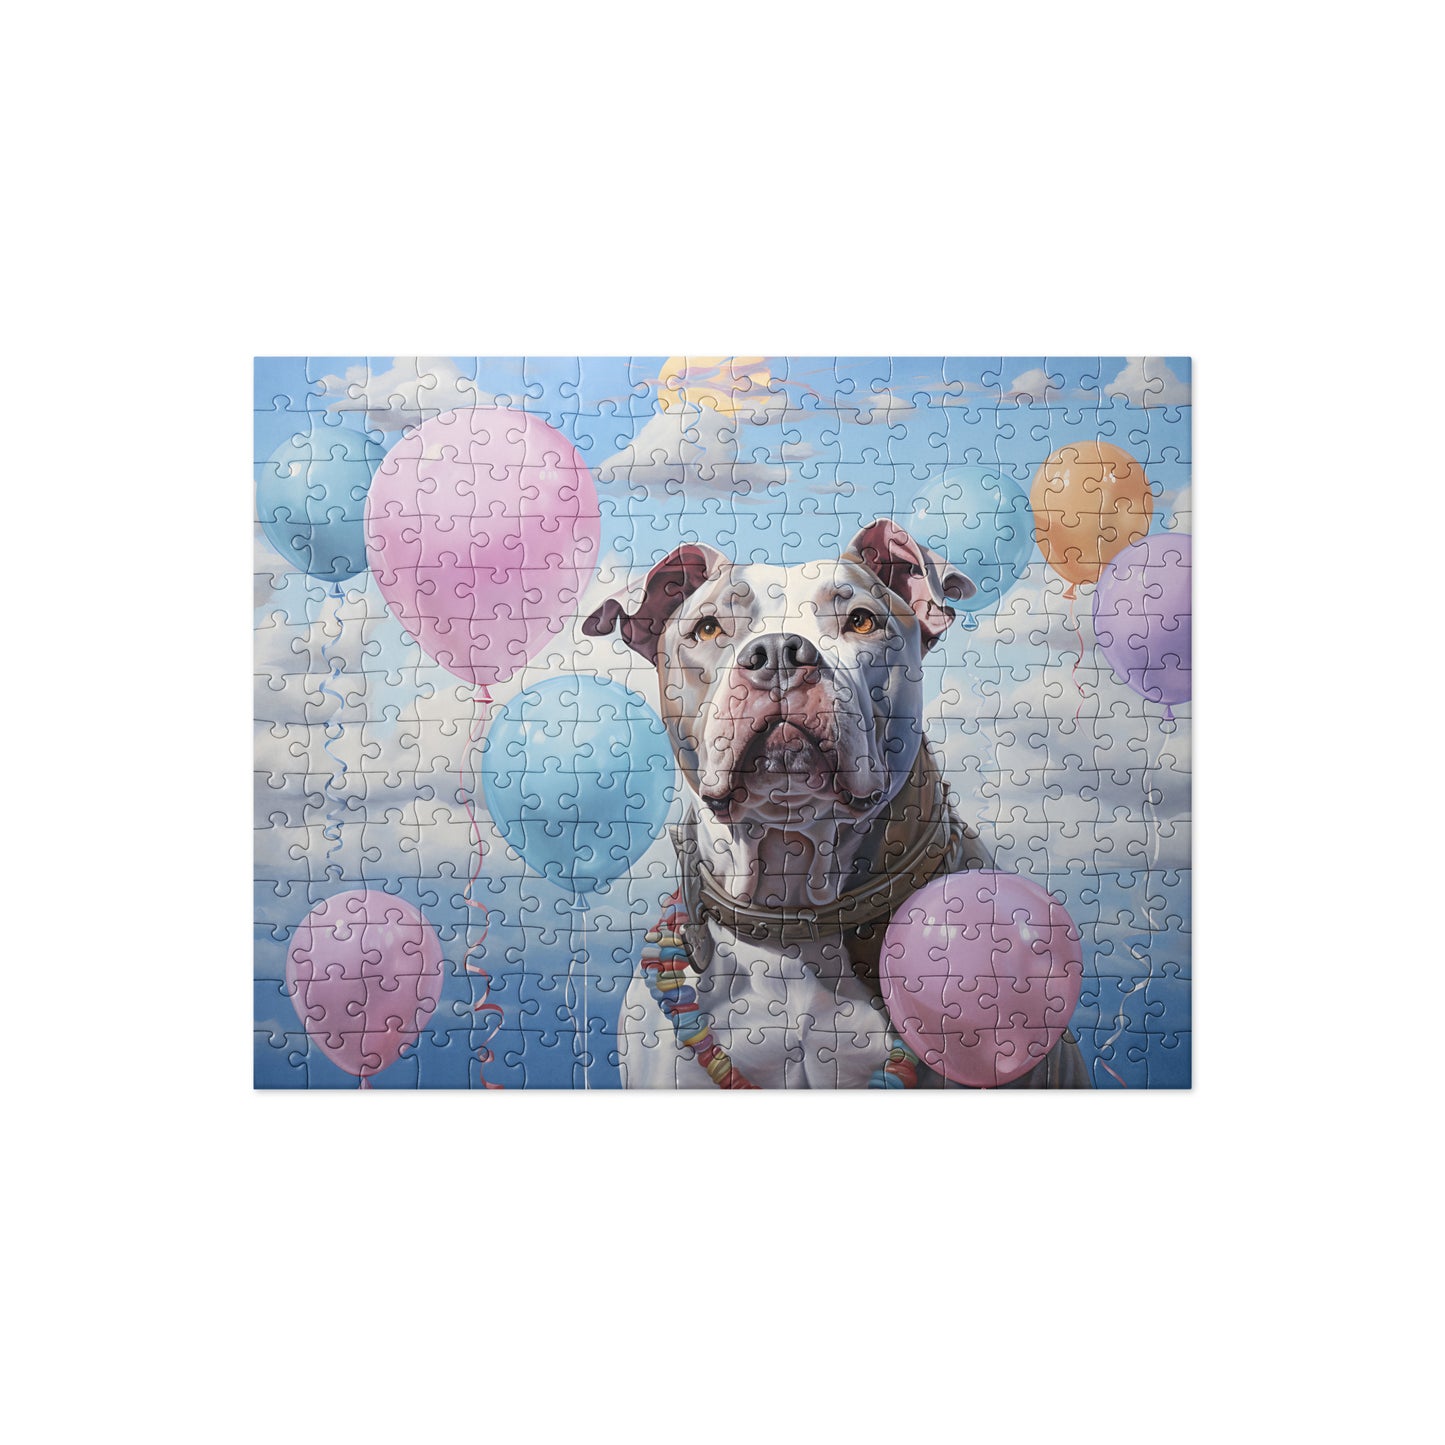 Pitbull Jigsaw Puzzle - "Balloons and Blue Skies" - Pittie Choy